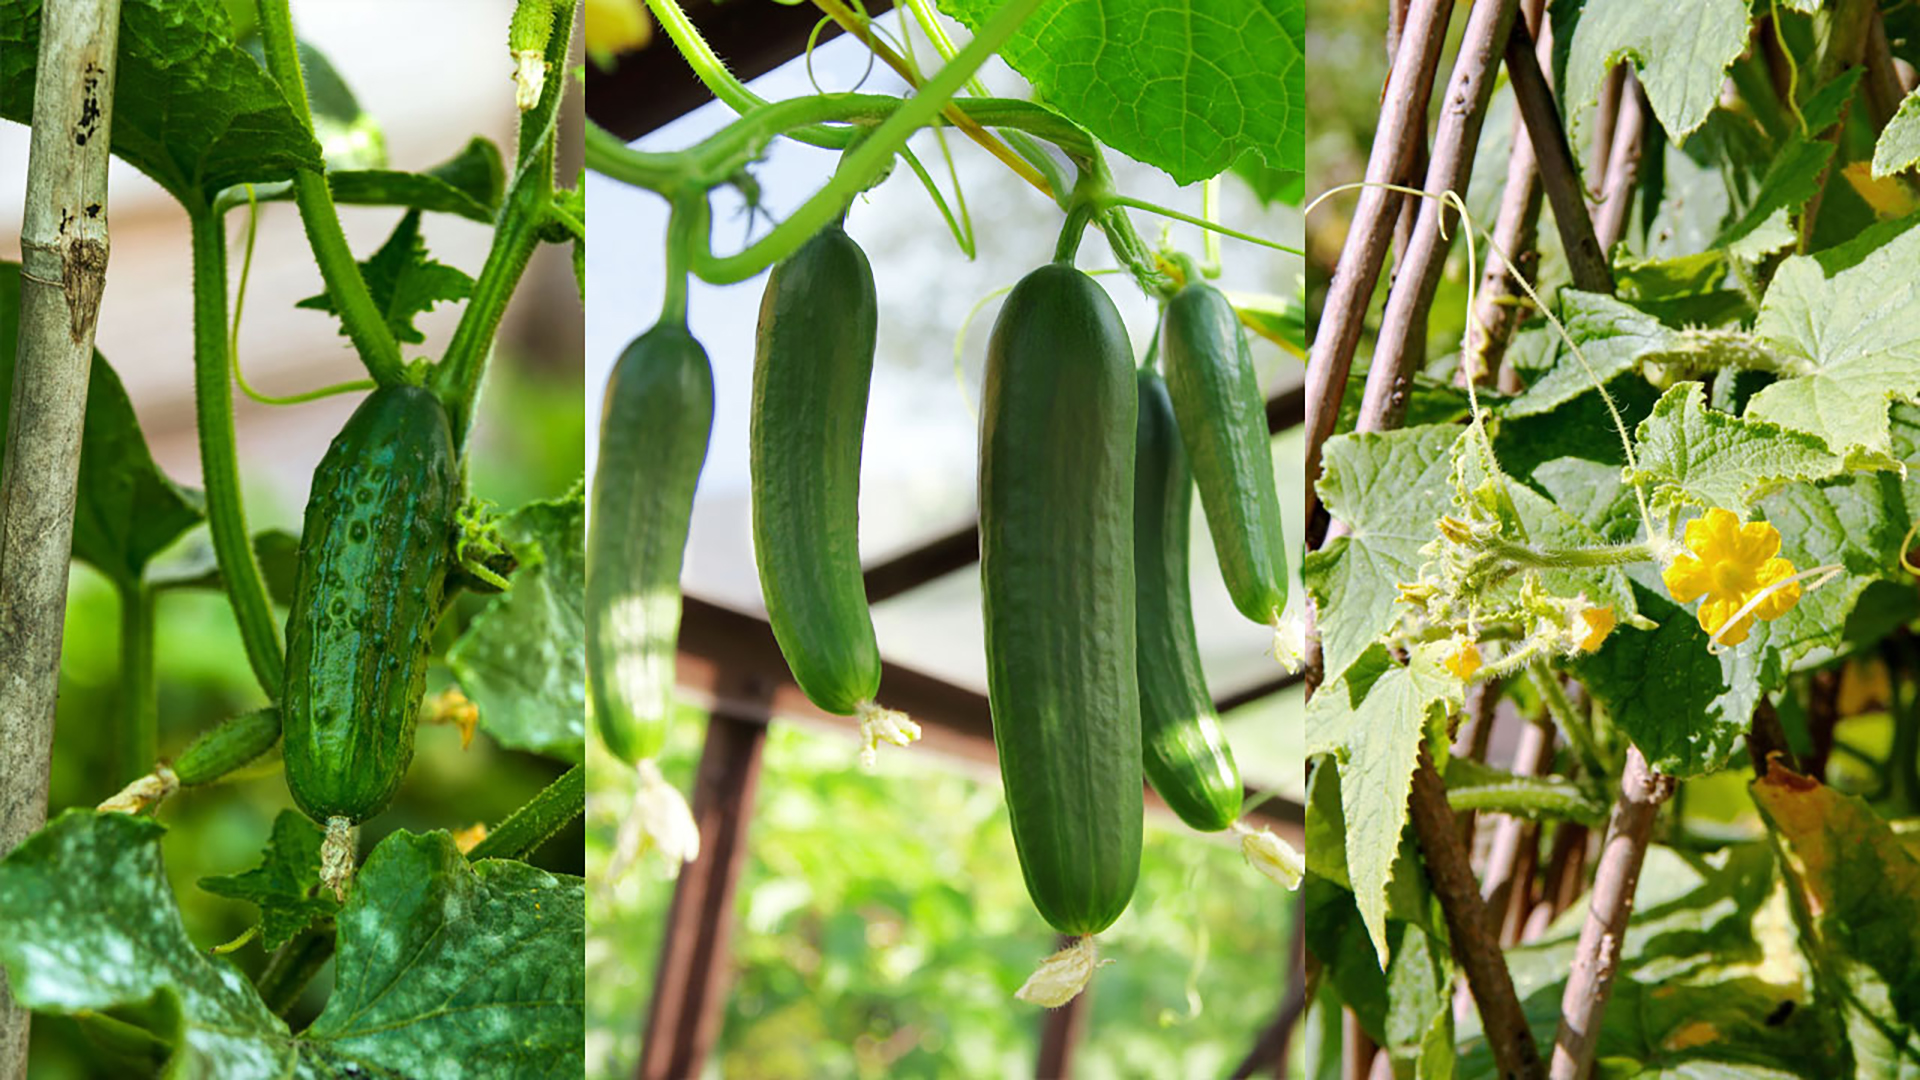 How to Trellis Cucumbers (with Pictures) - wikiHow